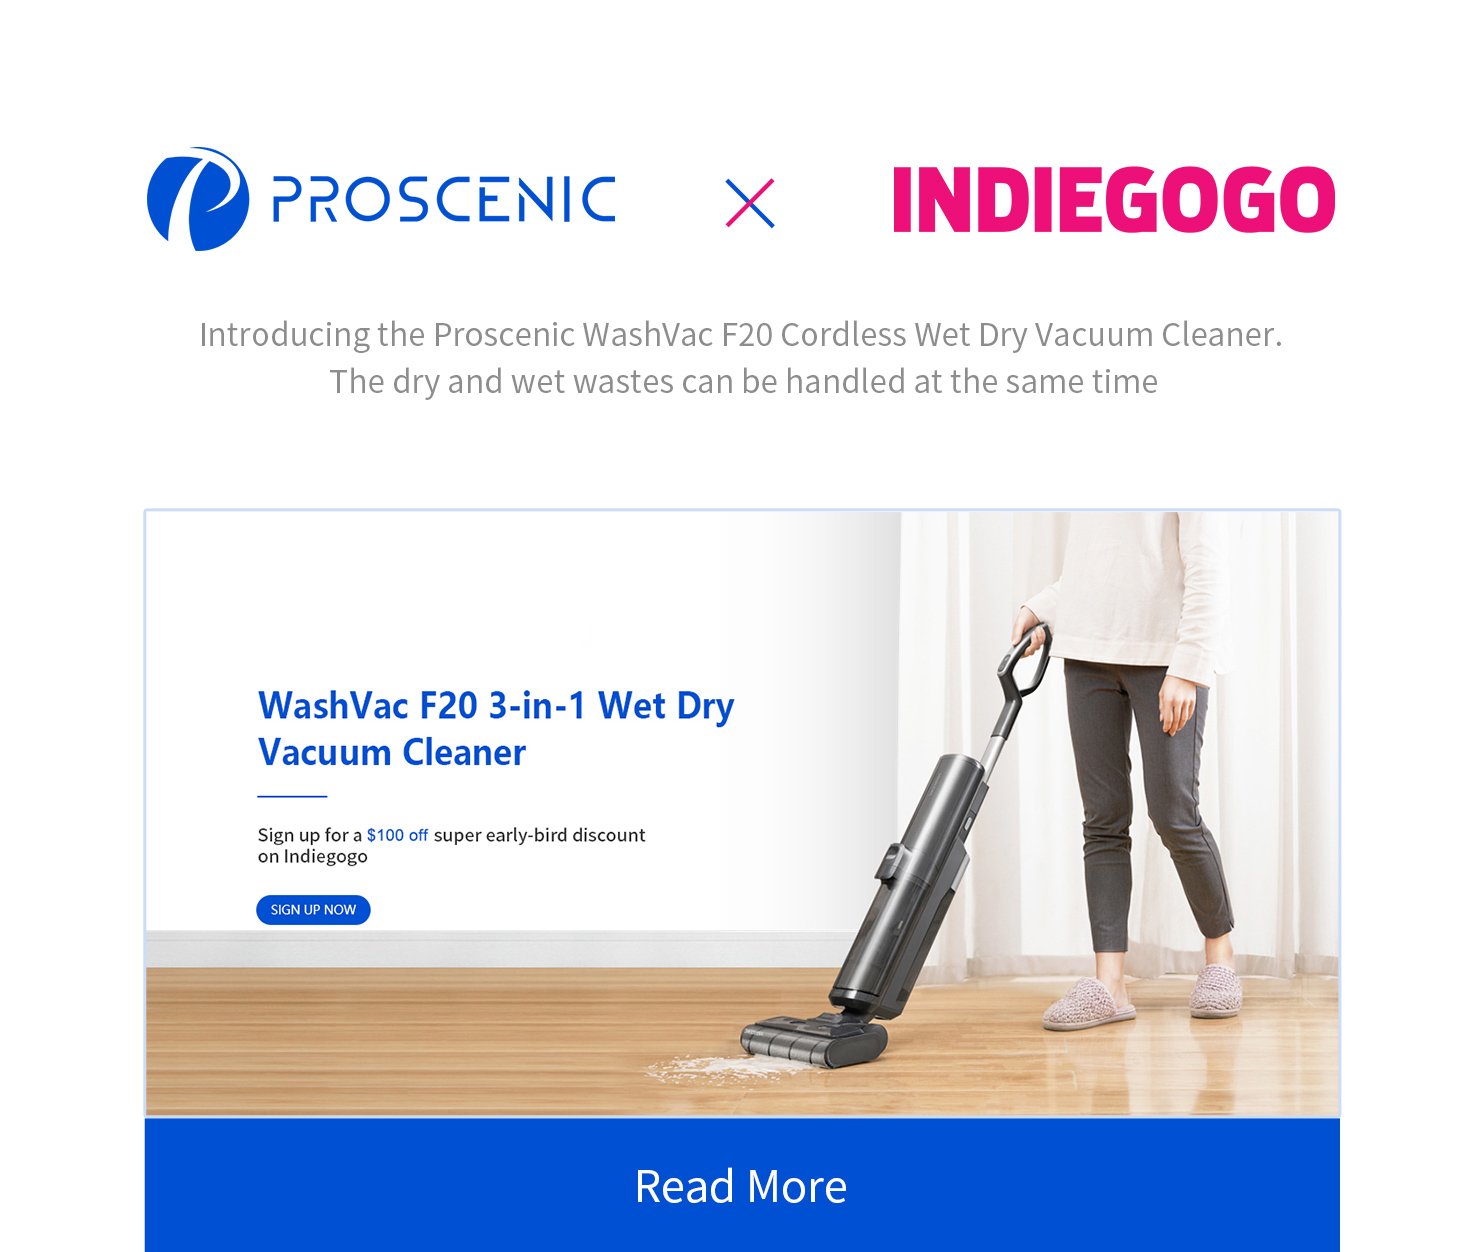 Available Now:P11 mopping cordless vacuum,🤩$149, refer friends to get a  free battery worth $50! - Proscenic